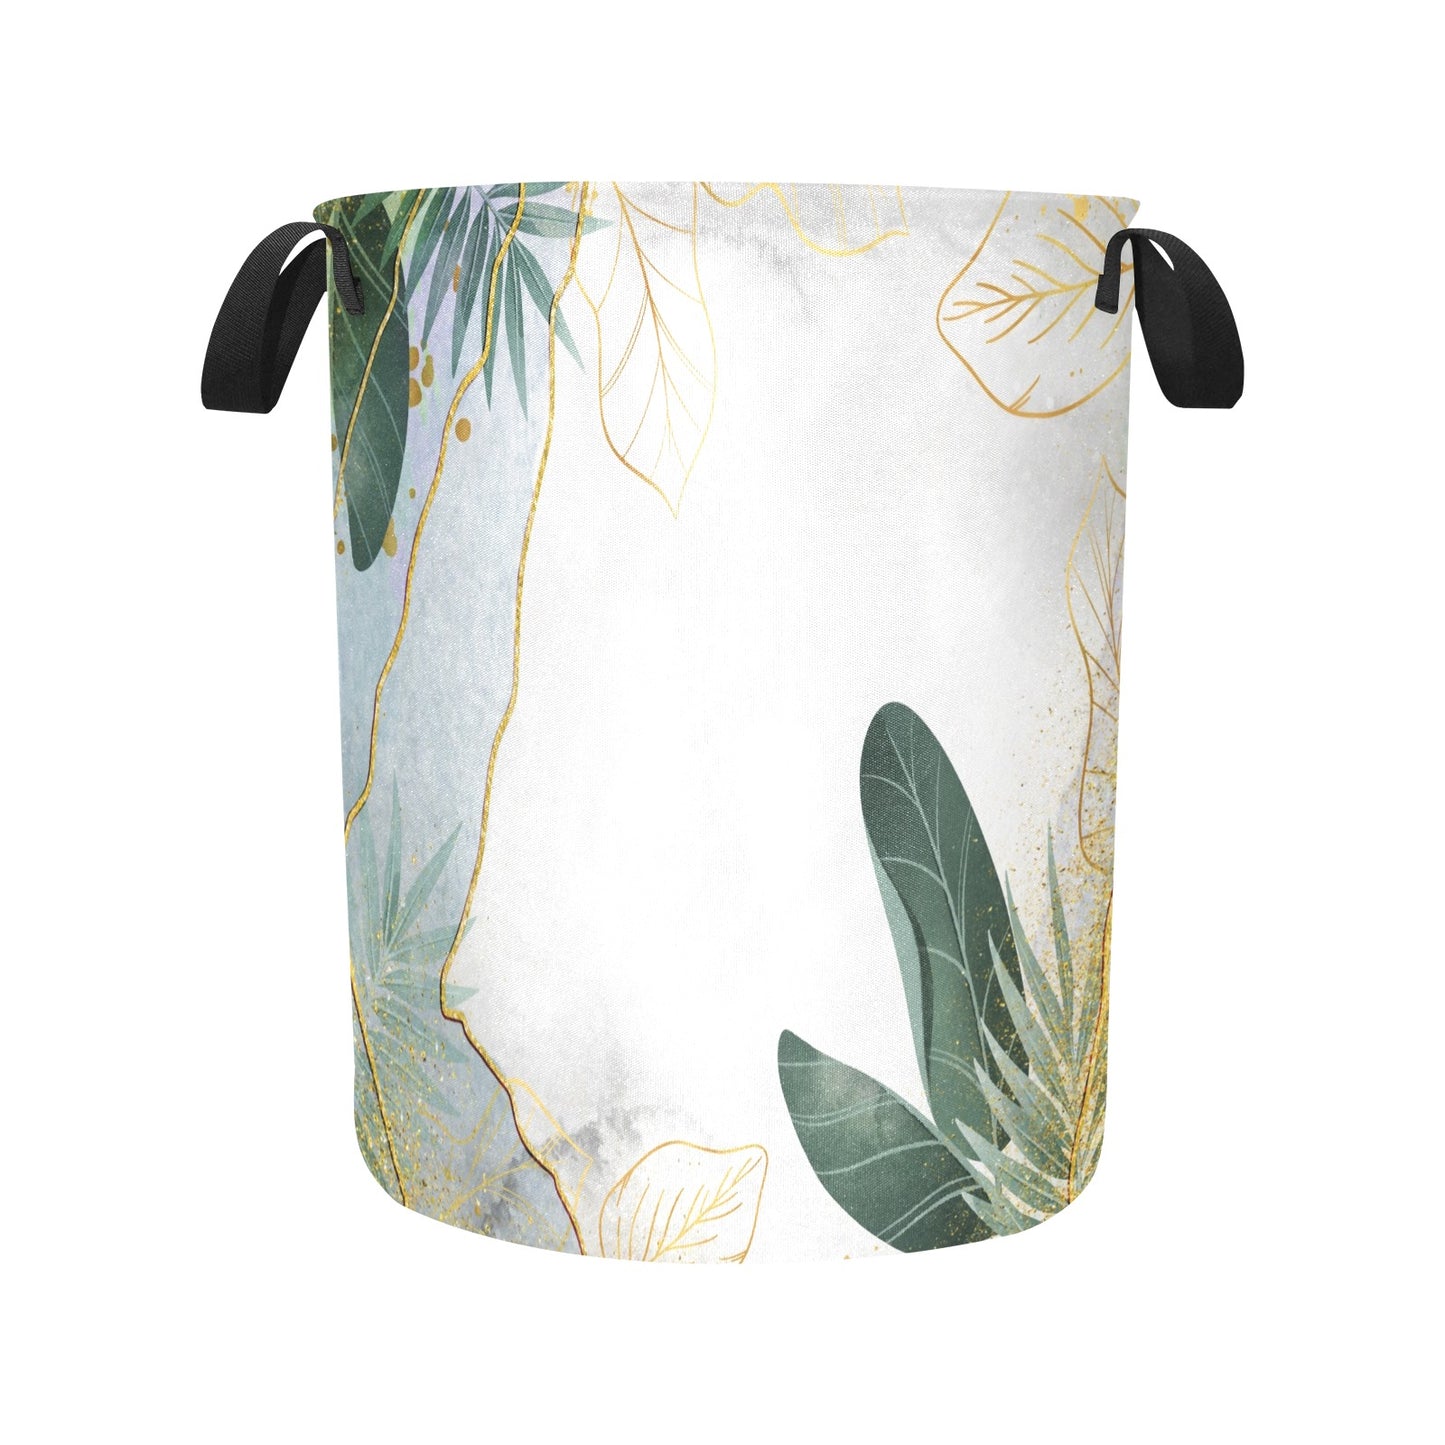 Green Floral Laundry Basket Laundry Bag - Laundry Bag (Large) - Zanlana Design and Home Decor